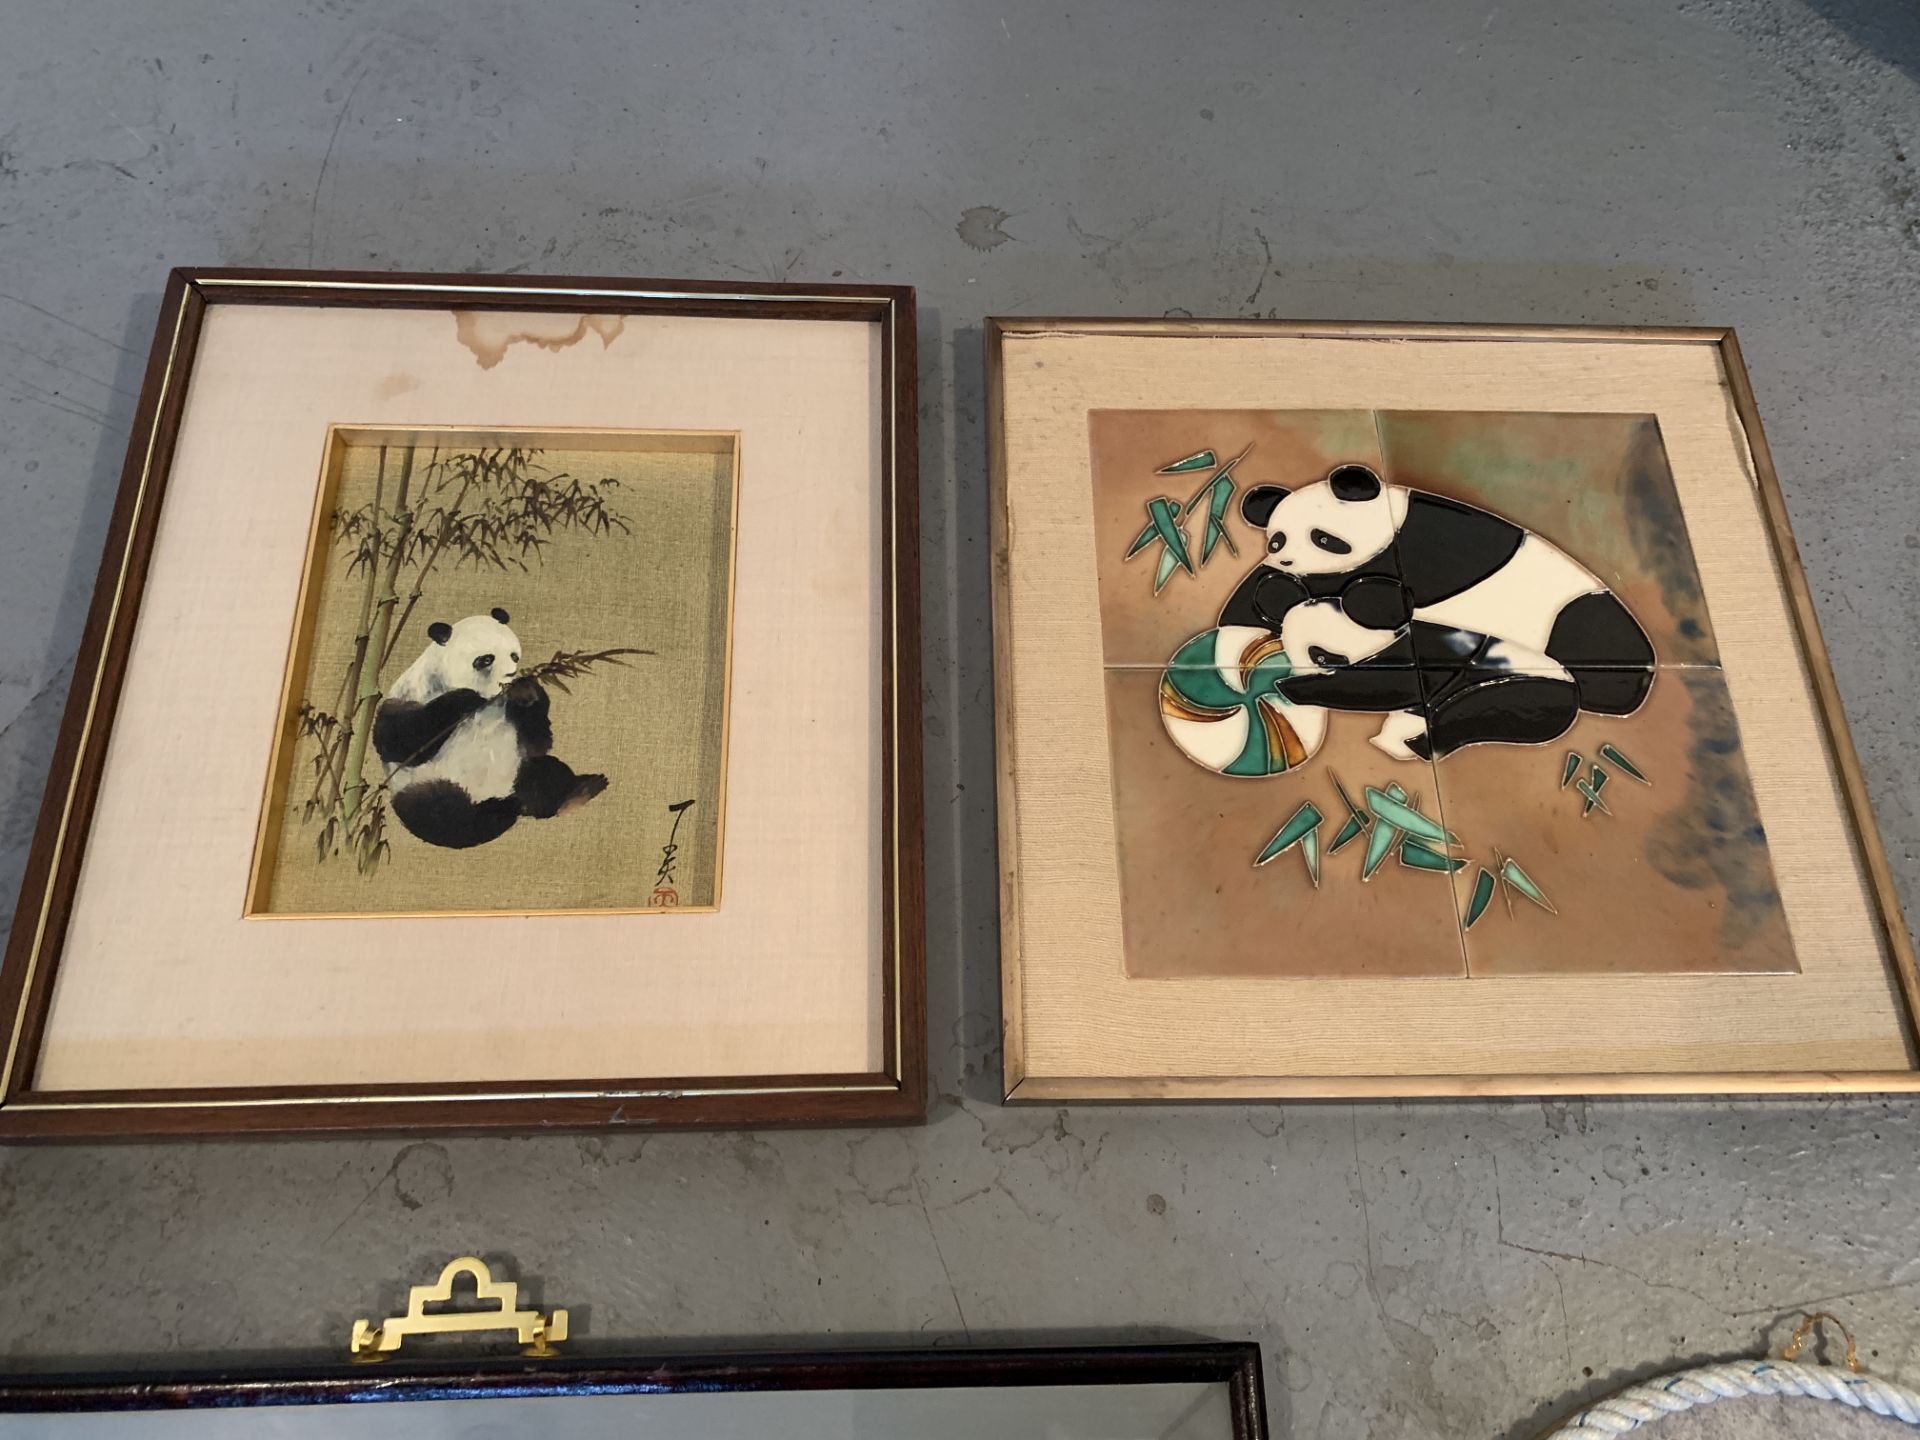 5 ART PIECES IN PANDA AND EAST ASIAN THEMES. DIMENSIONS, CLOCKWISE FROM TOP LEFT: 17X15", 16X16", - Image 3 of 4